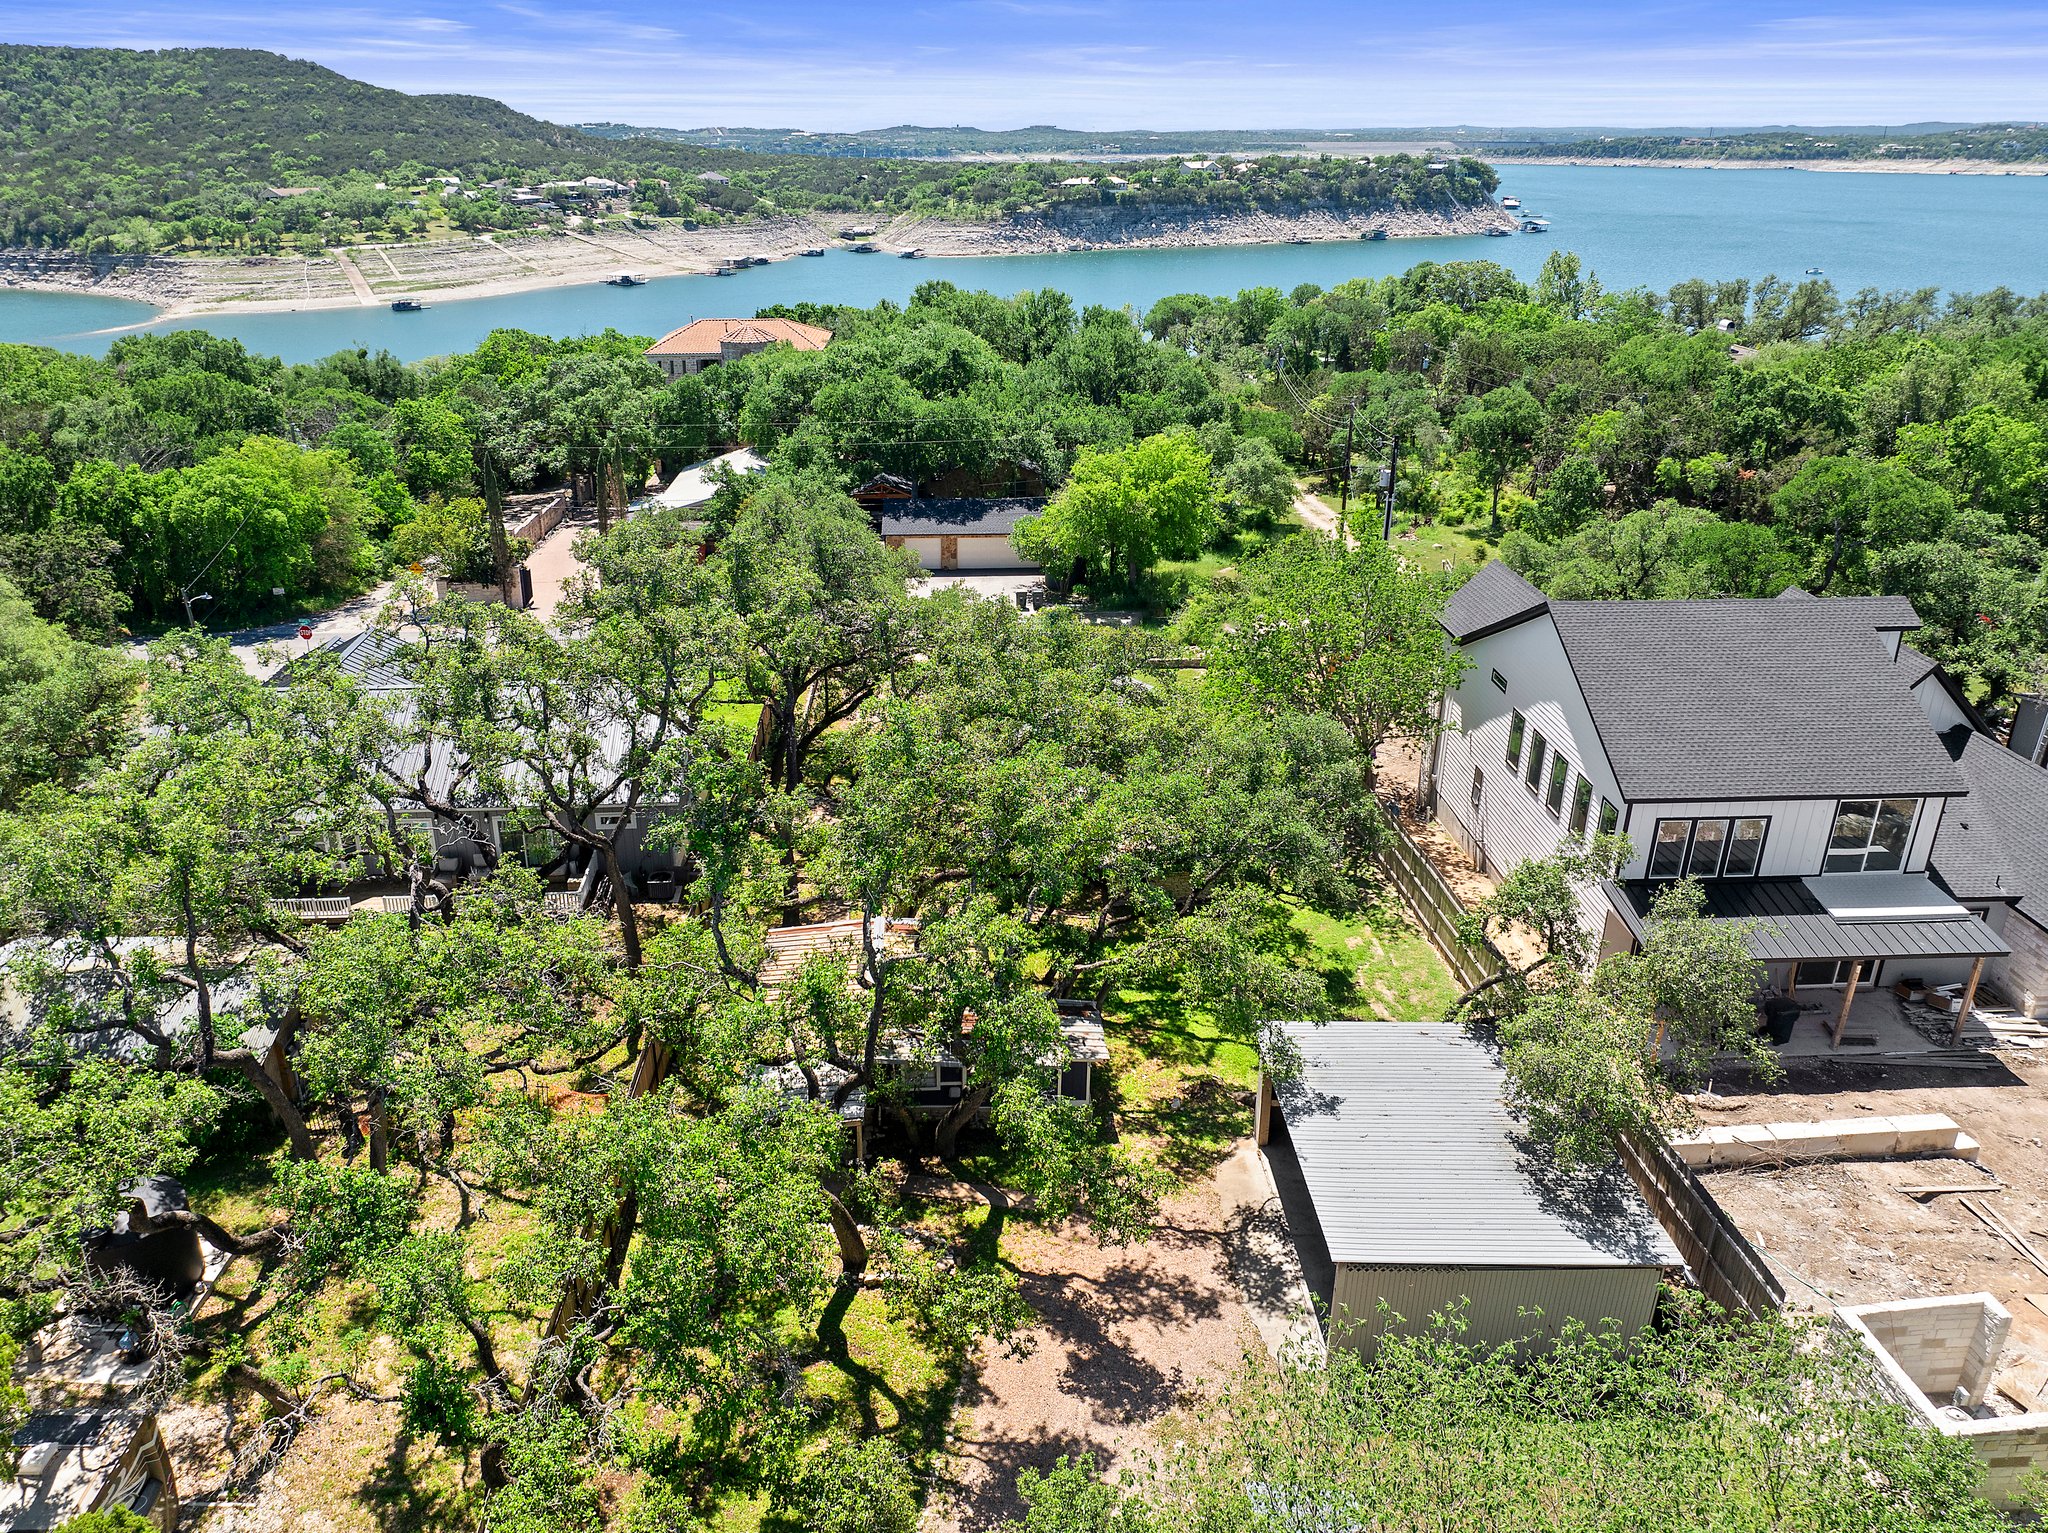 Live near Lake Travis! The property is the one with the light gray roof. There are two houses.